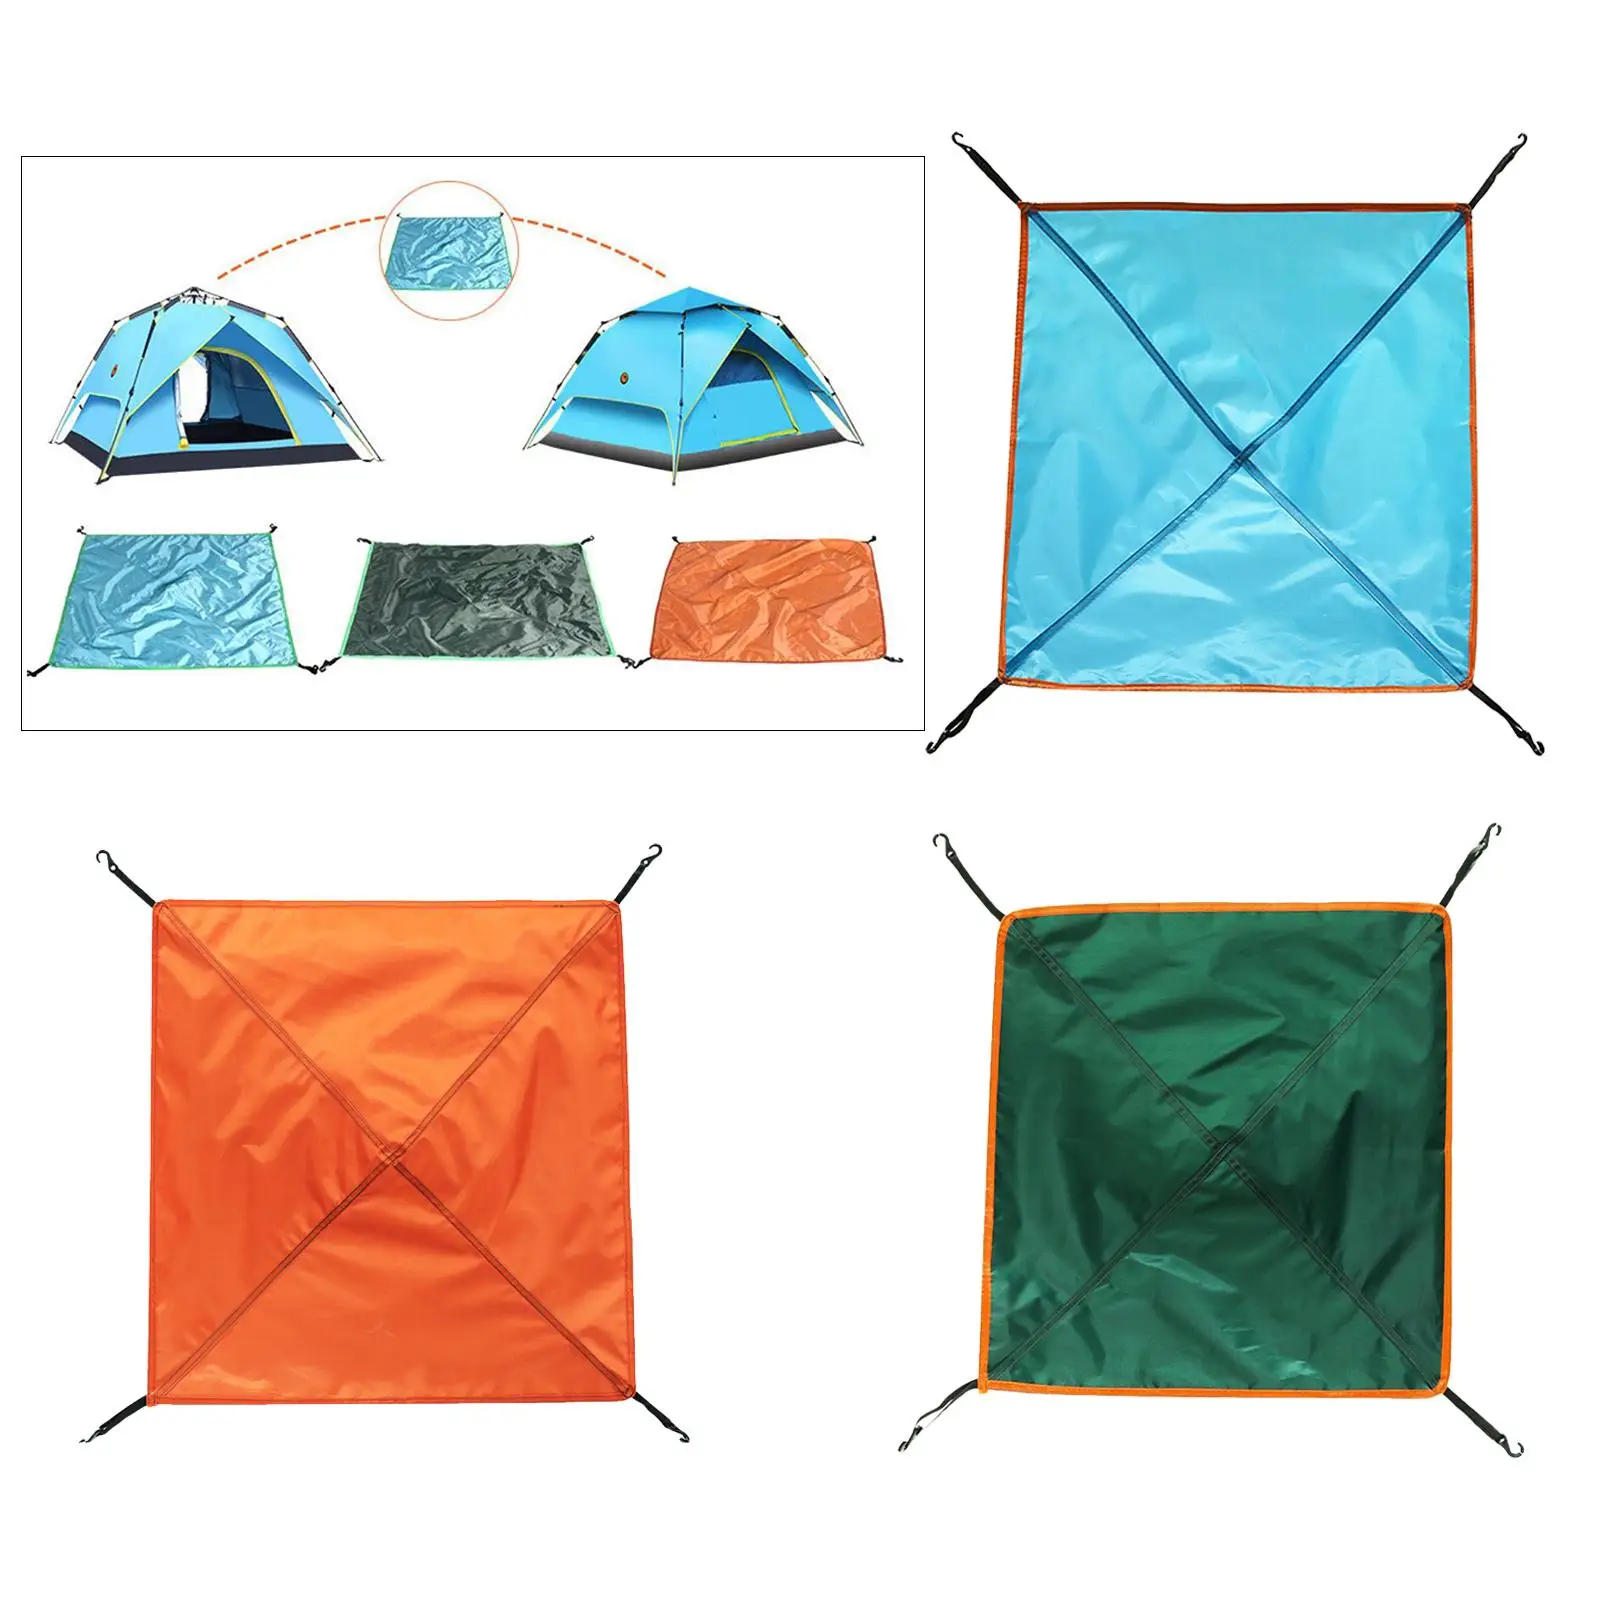 Waterproof Camping , Easy to Cover The  Rain, Large Compact Tent es for  Or under The Tent